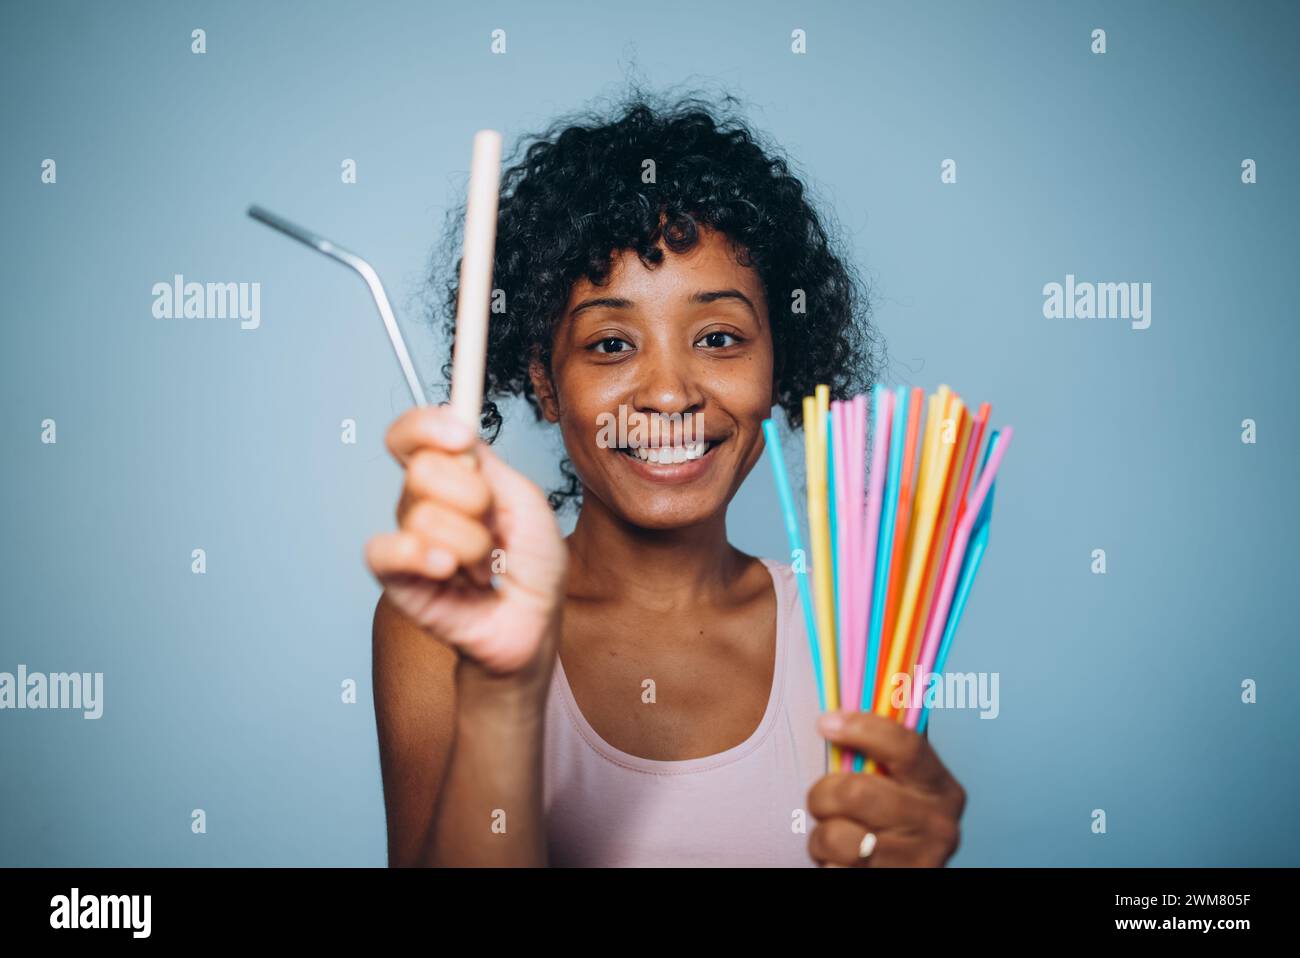 A cheerful woman presents a reusable metal straw and a bouquet of colorful plastic straws, advocating for eco-friendly choices. Reasonable consumption, concern for the environment. Stock Photo